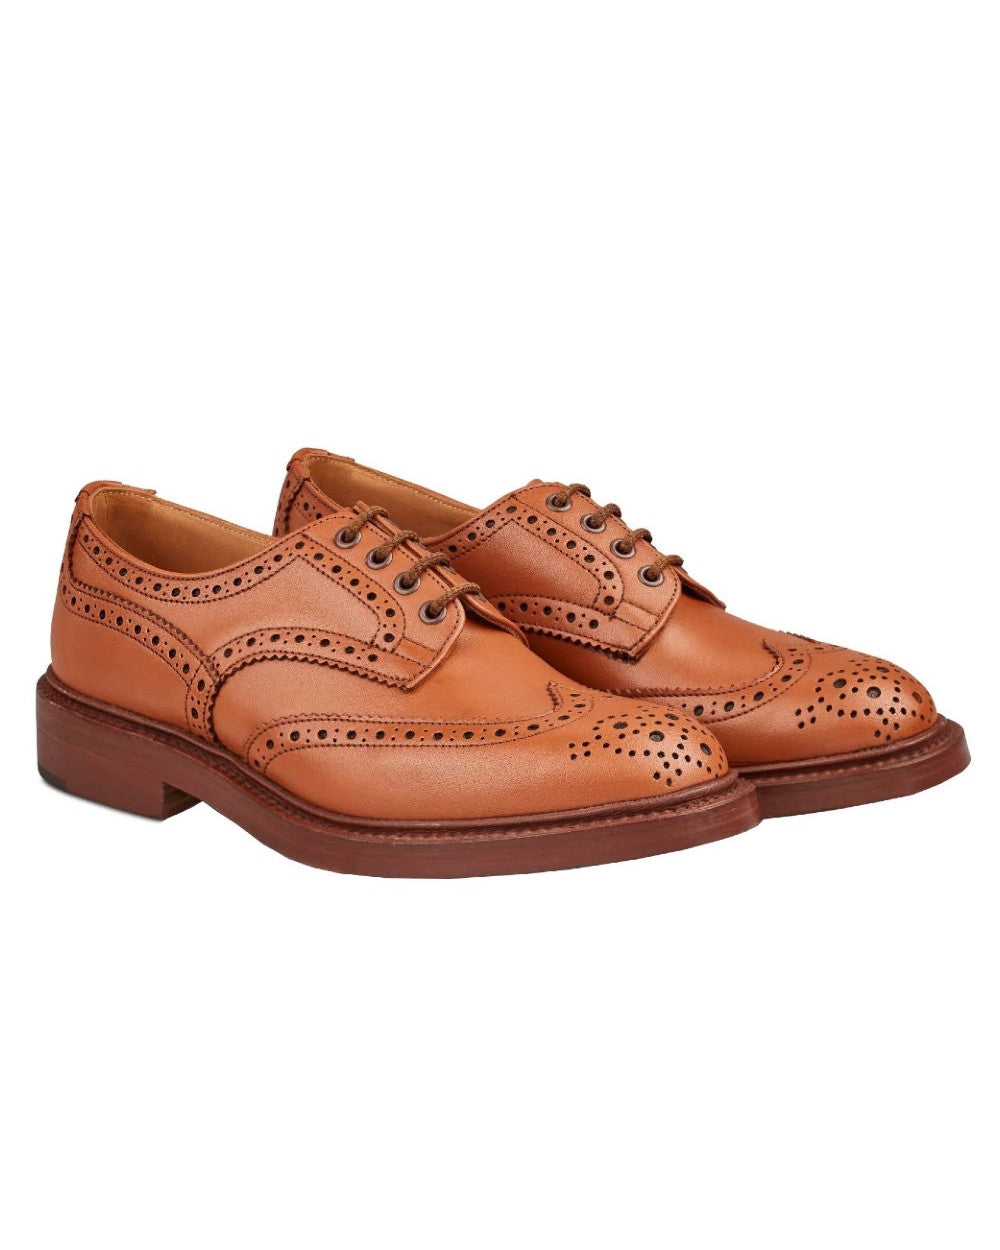 Tan Coloured Trickers Bourton Leather Sole Country Shoe On A White Background 